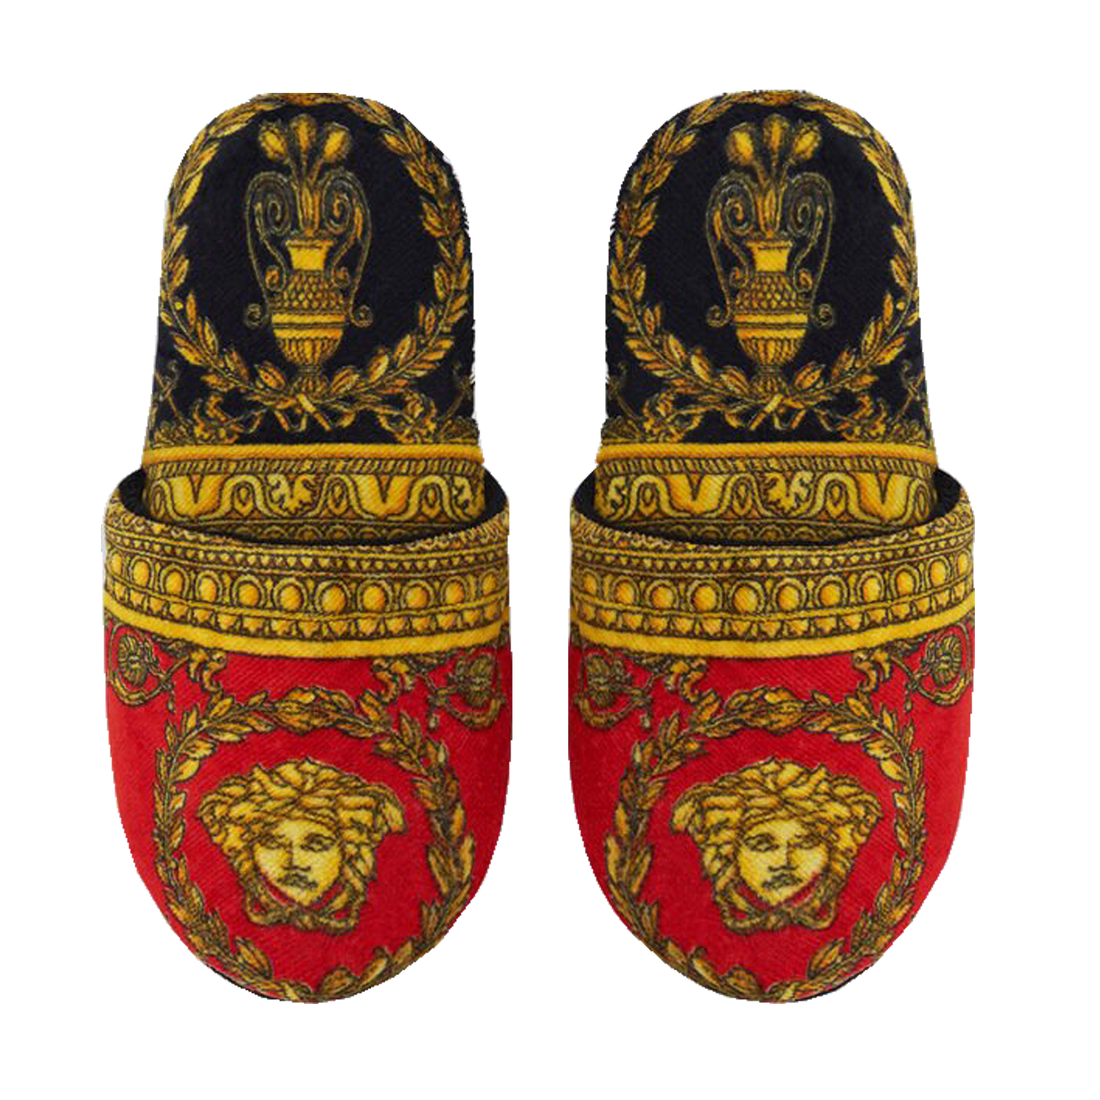 I Heart Baroque Slippers Red